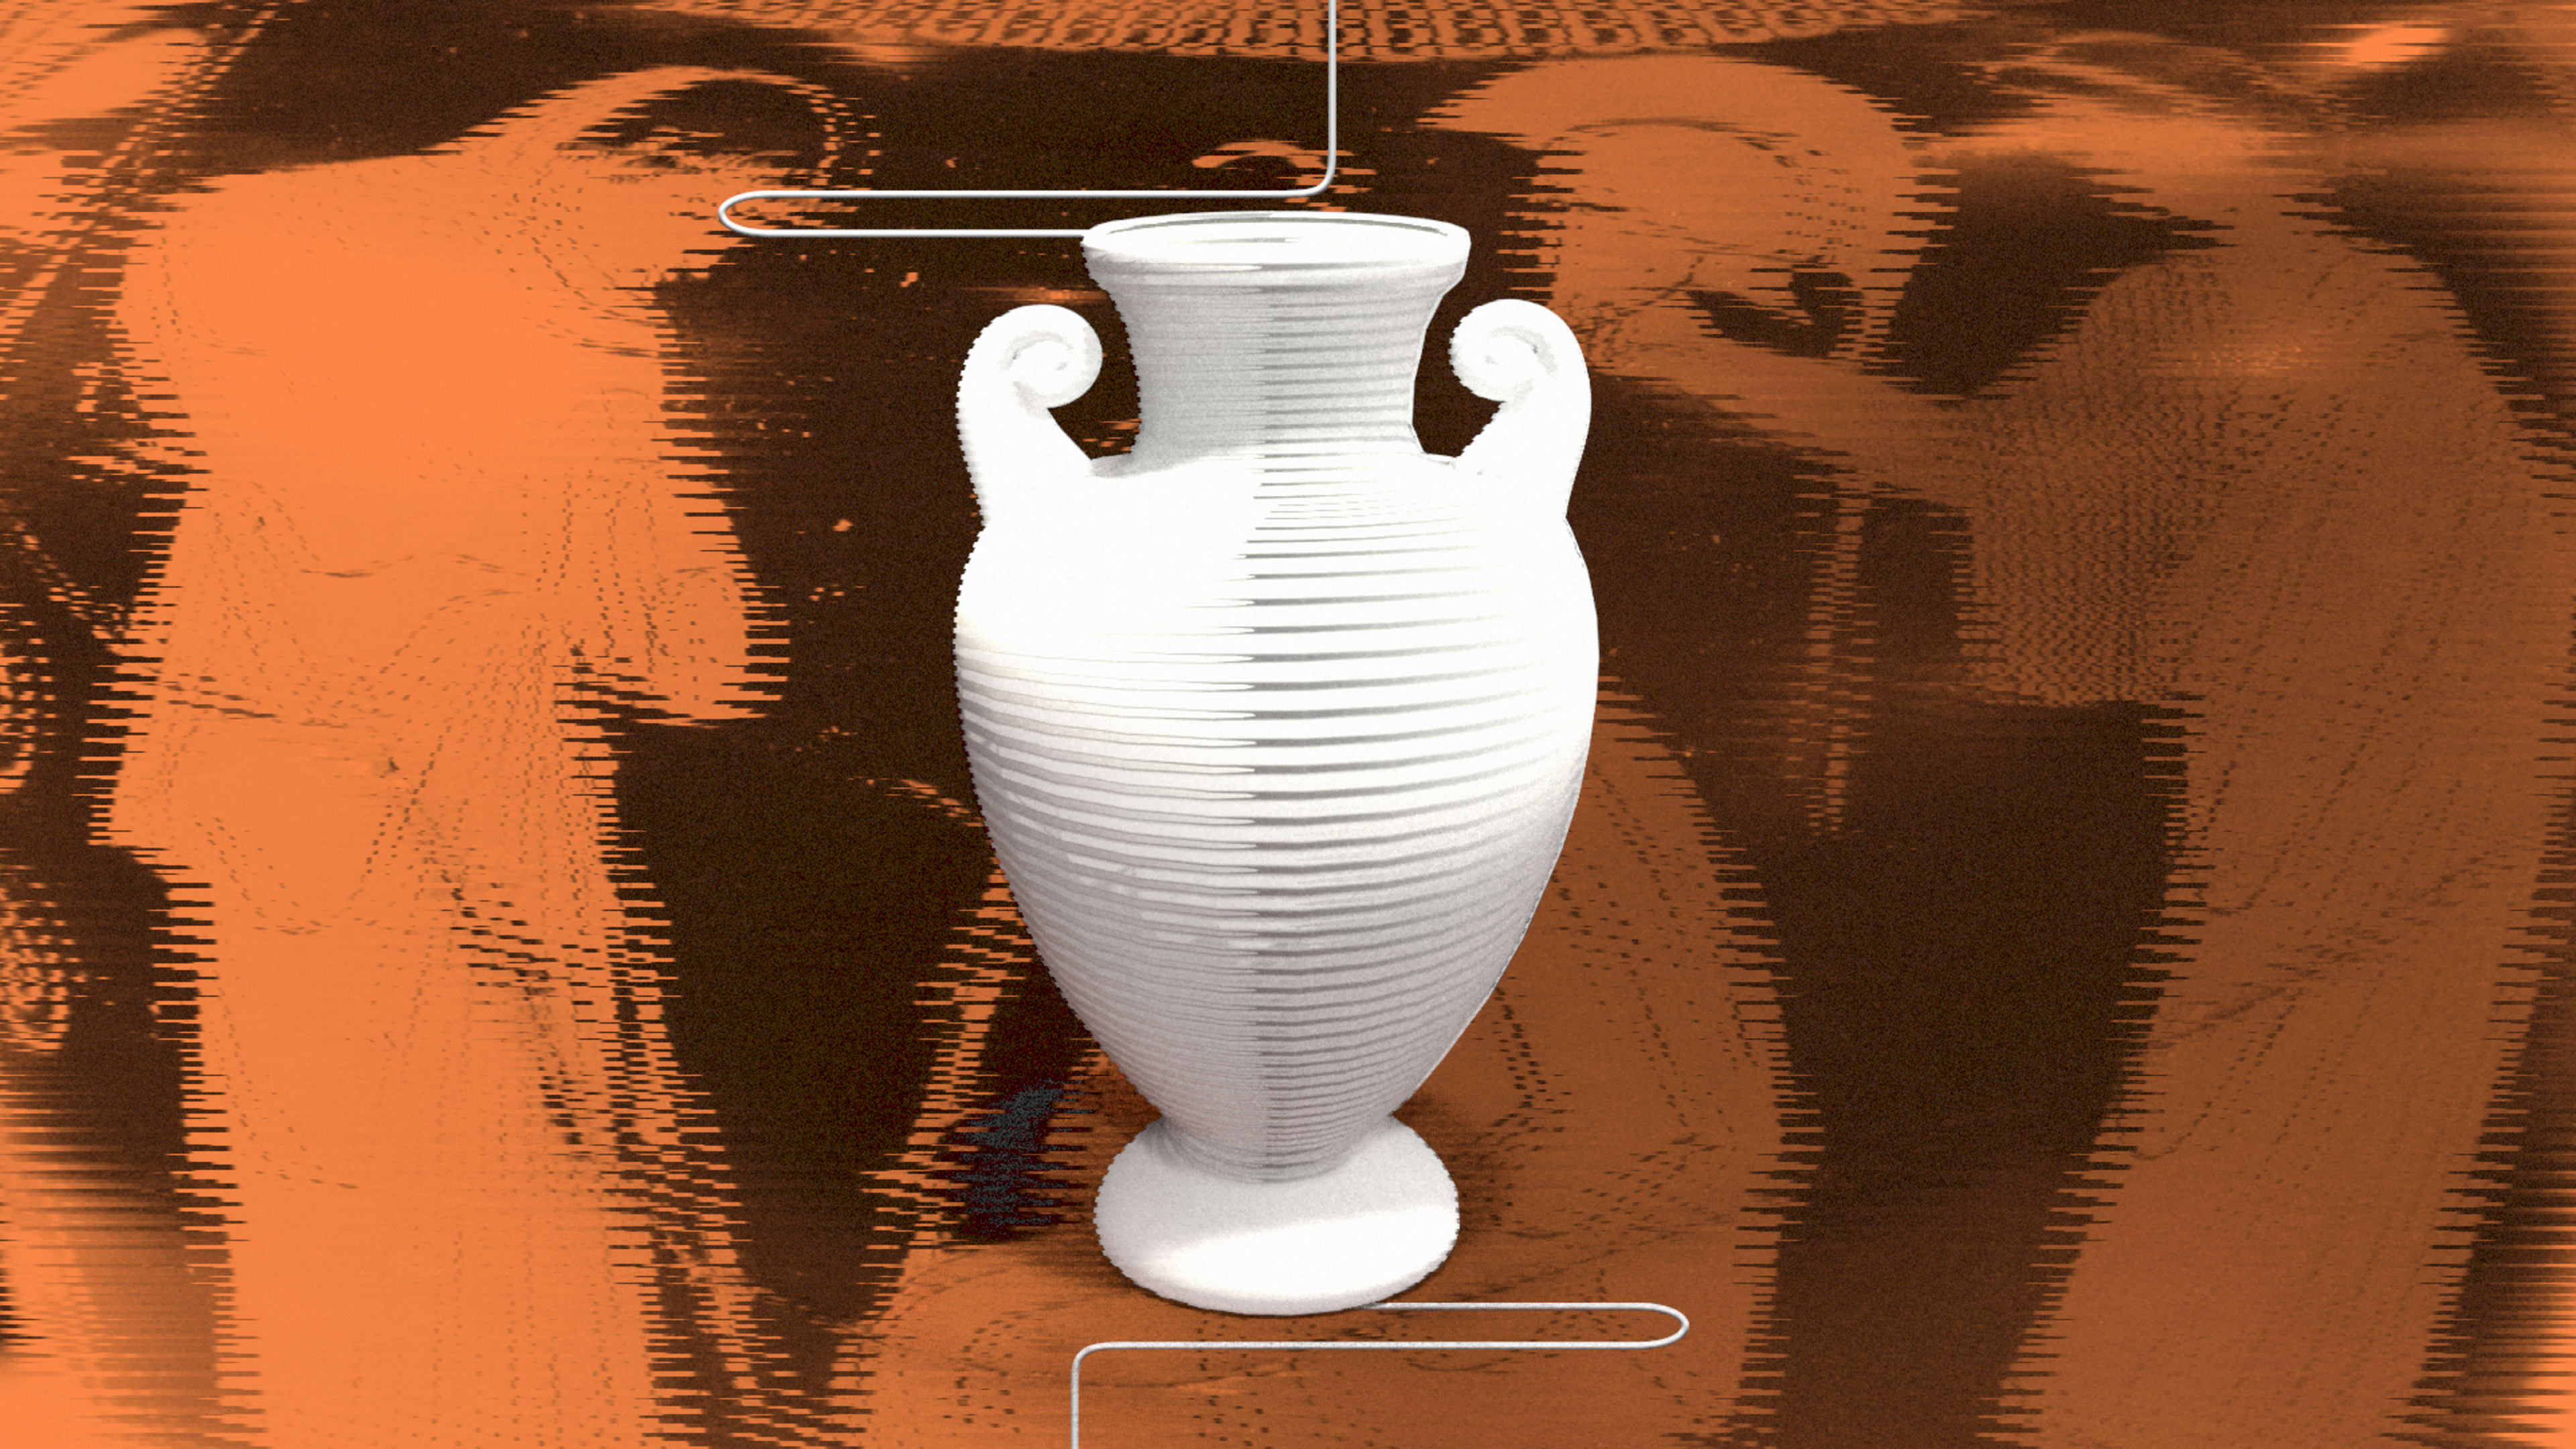 3D printing is quietly transforming an unexpected industry: museums